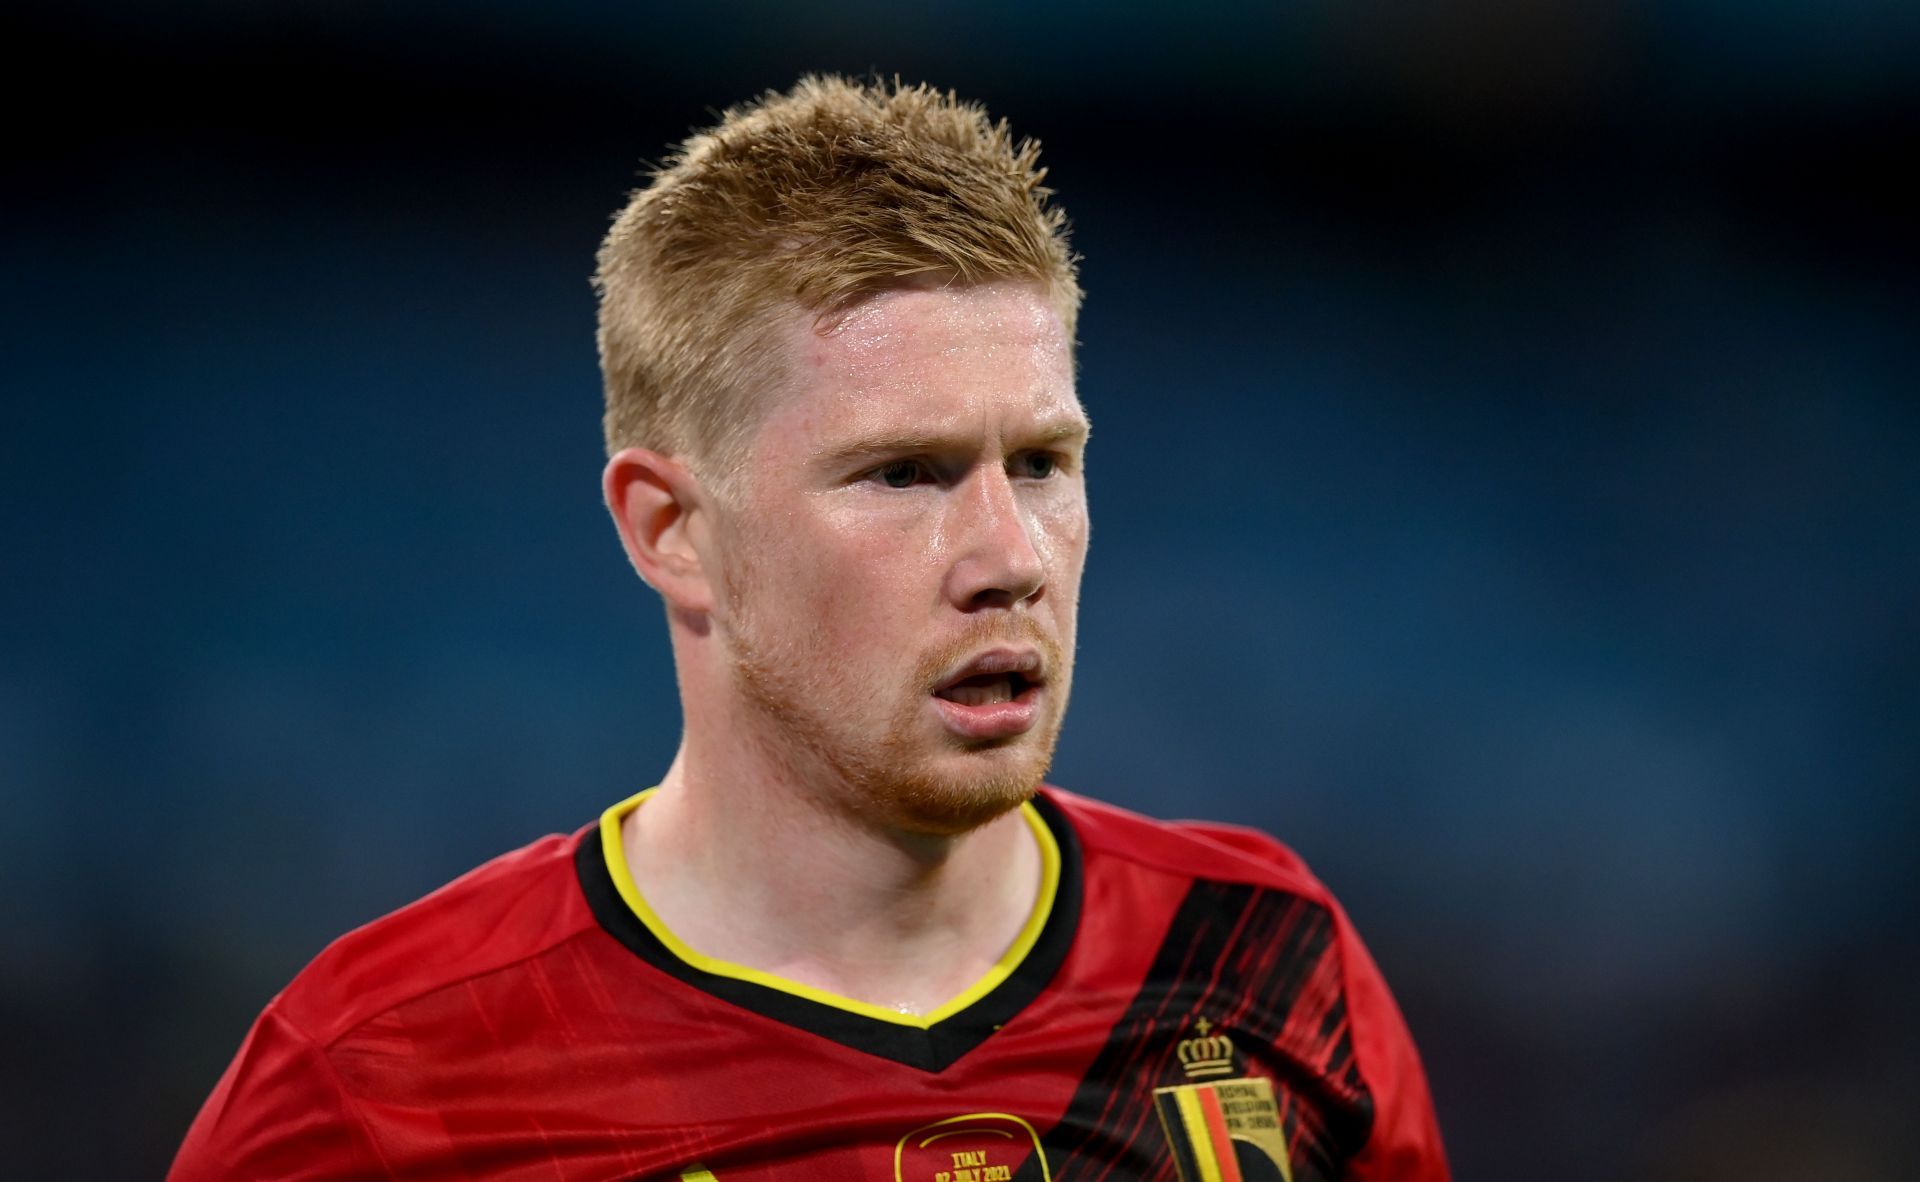 Kevin de Bruyne will be among the biggest stars to feature in the World Cup later this year